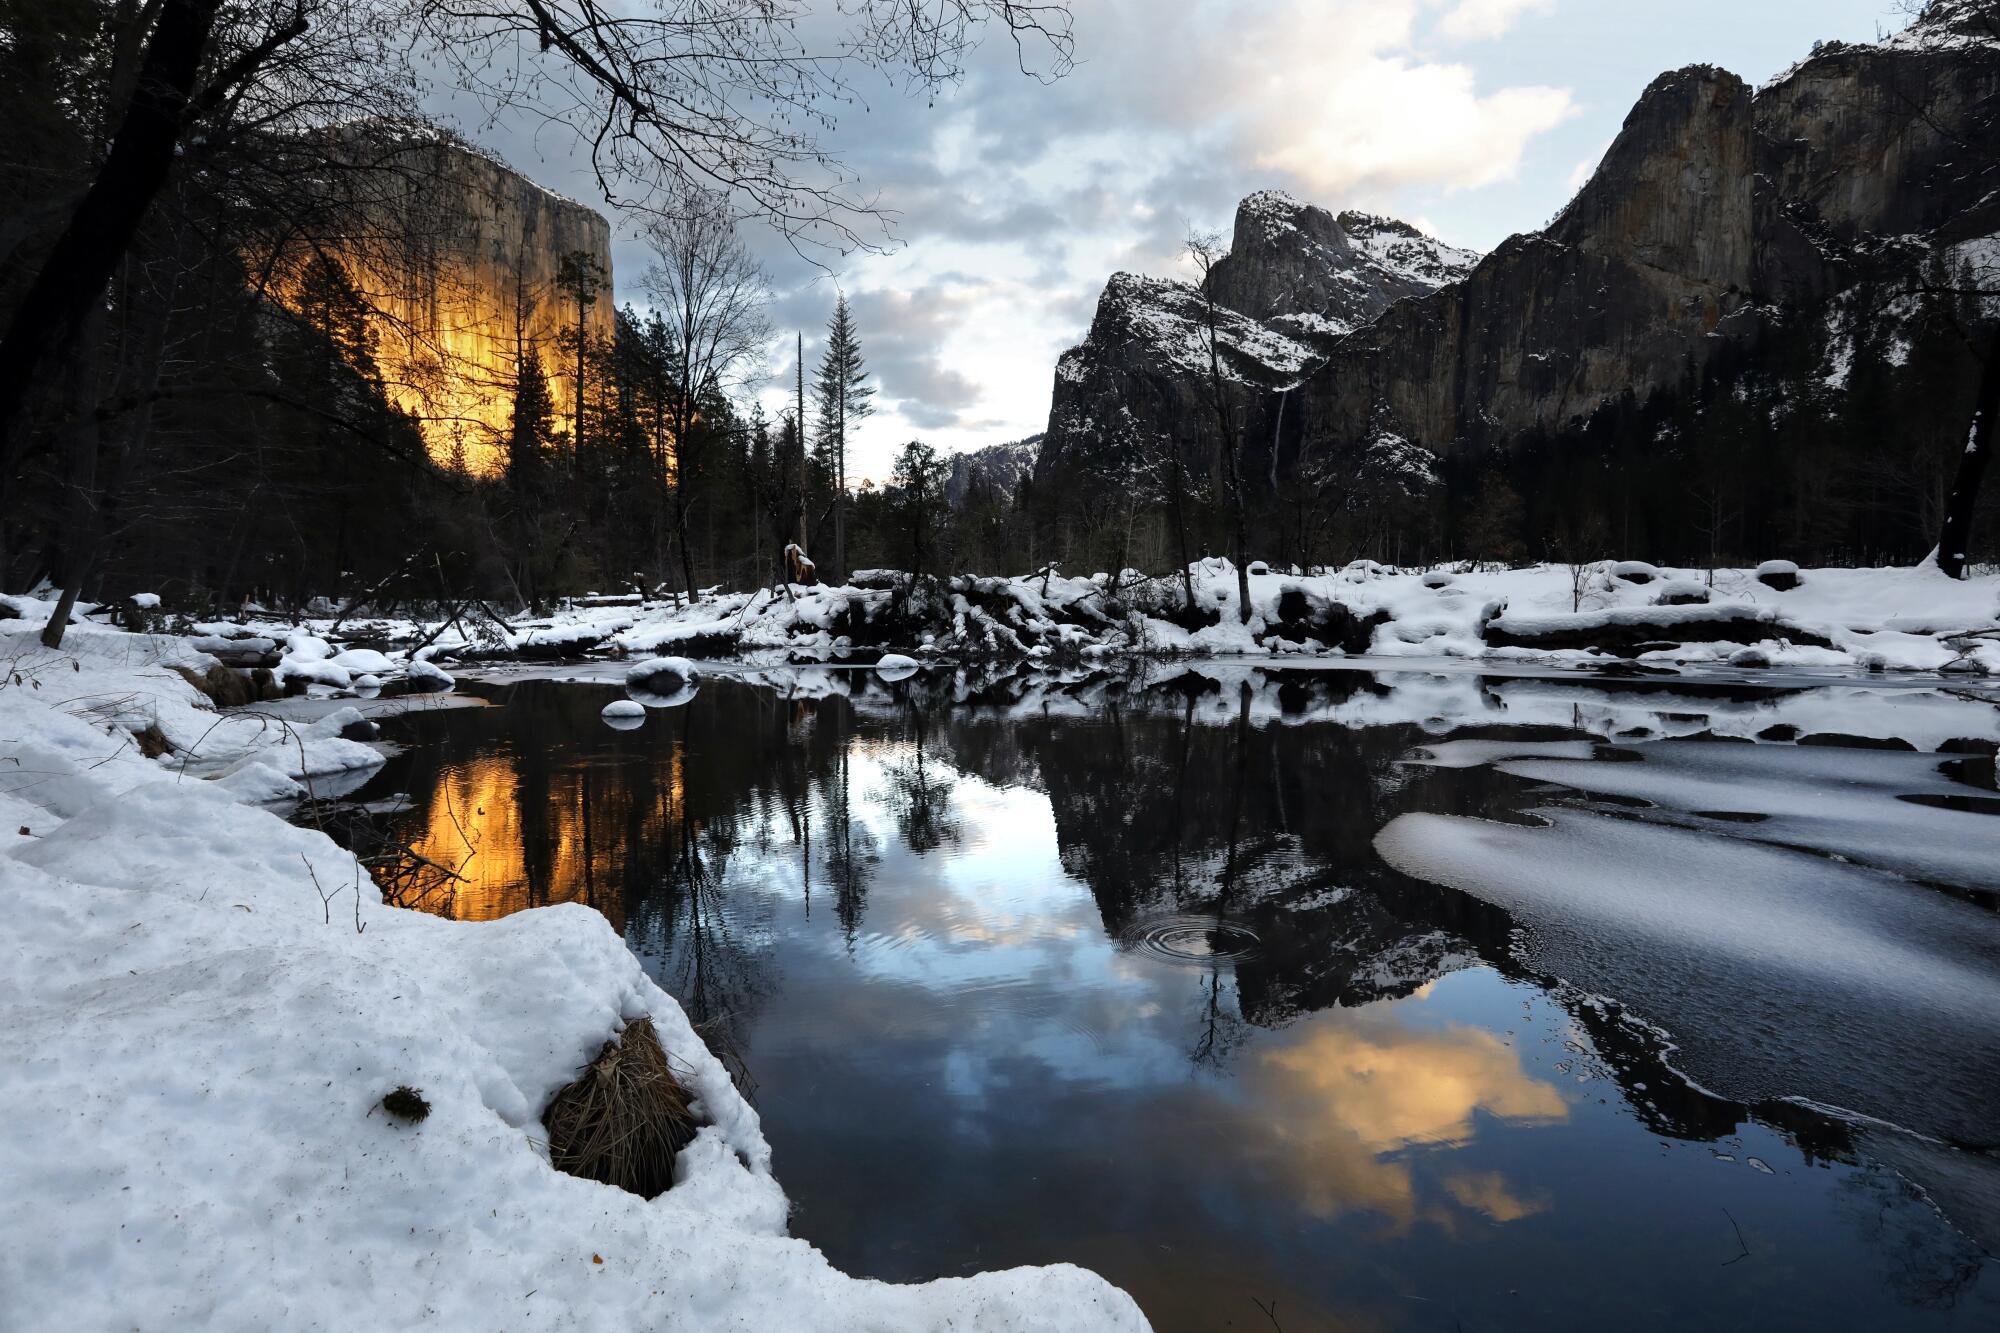 The Merced River flows between snow-covered banks with El Capitan in the background